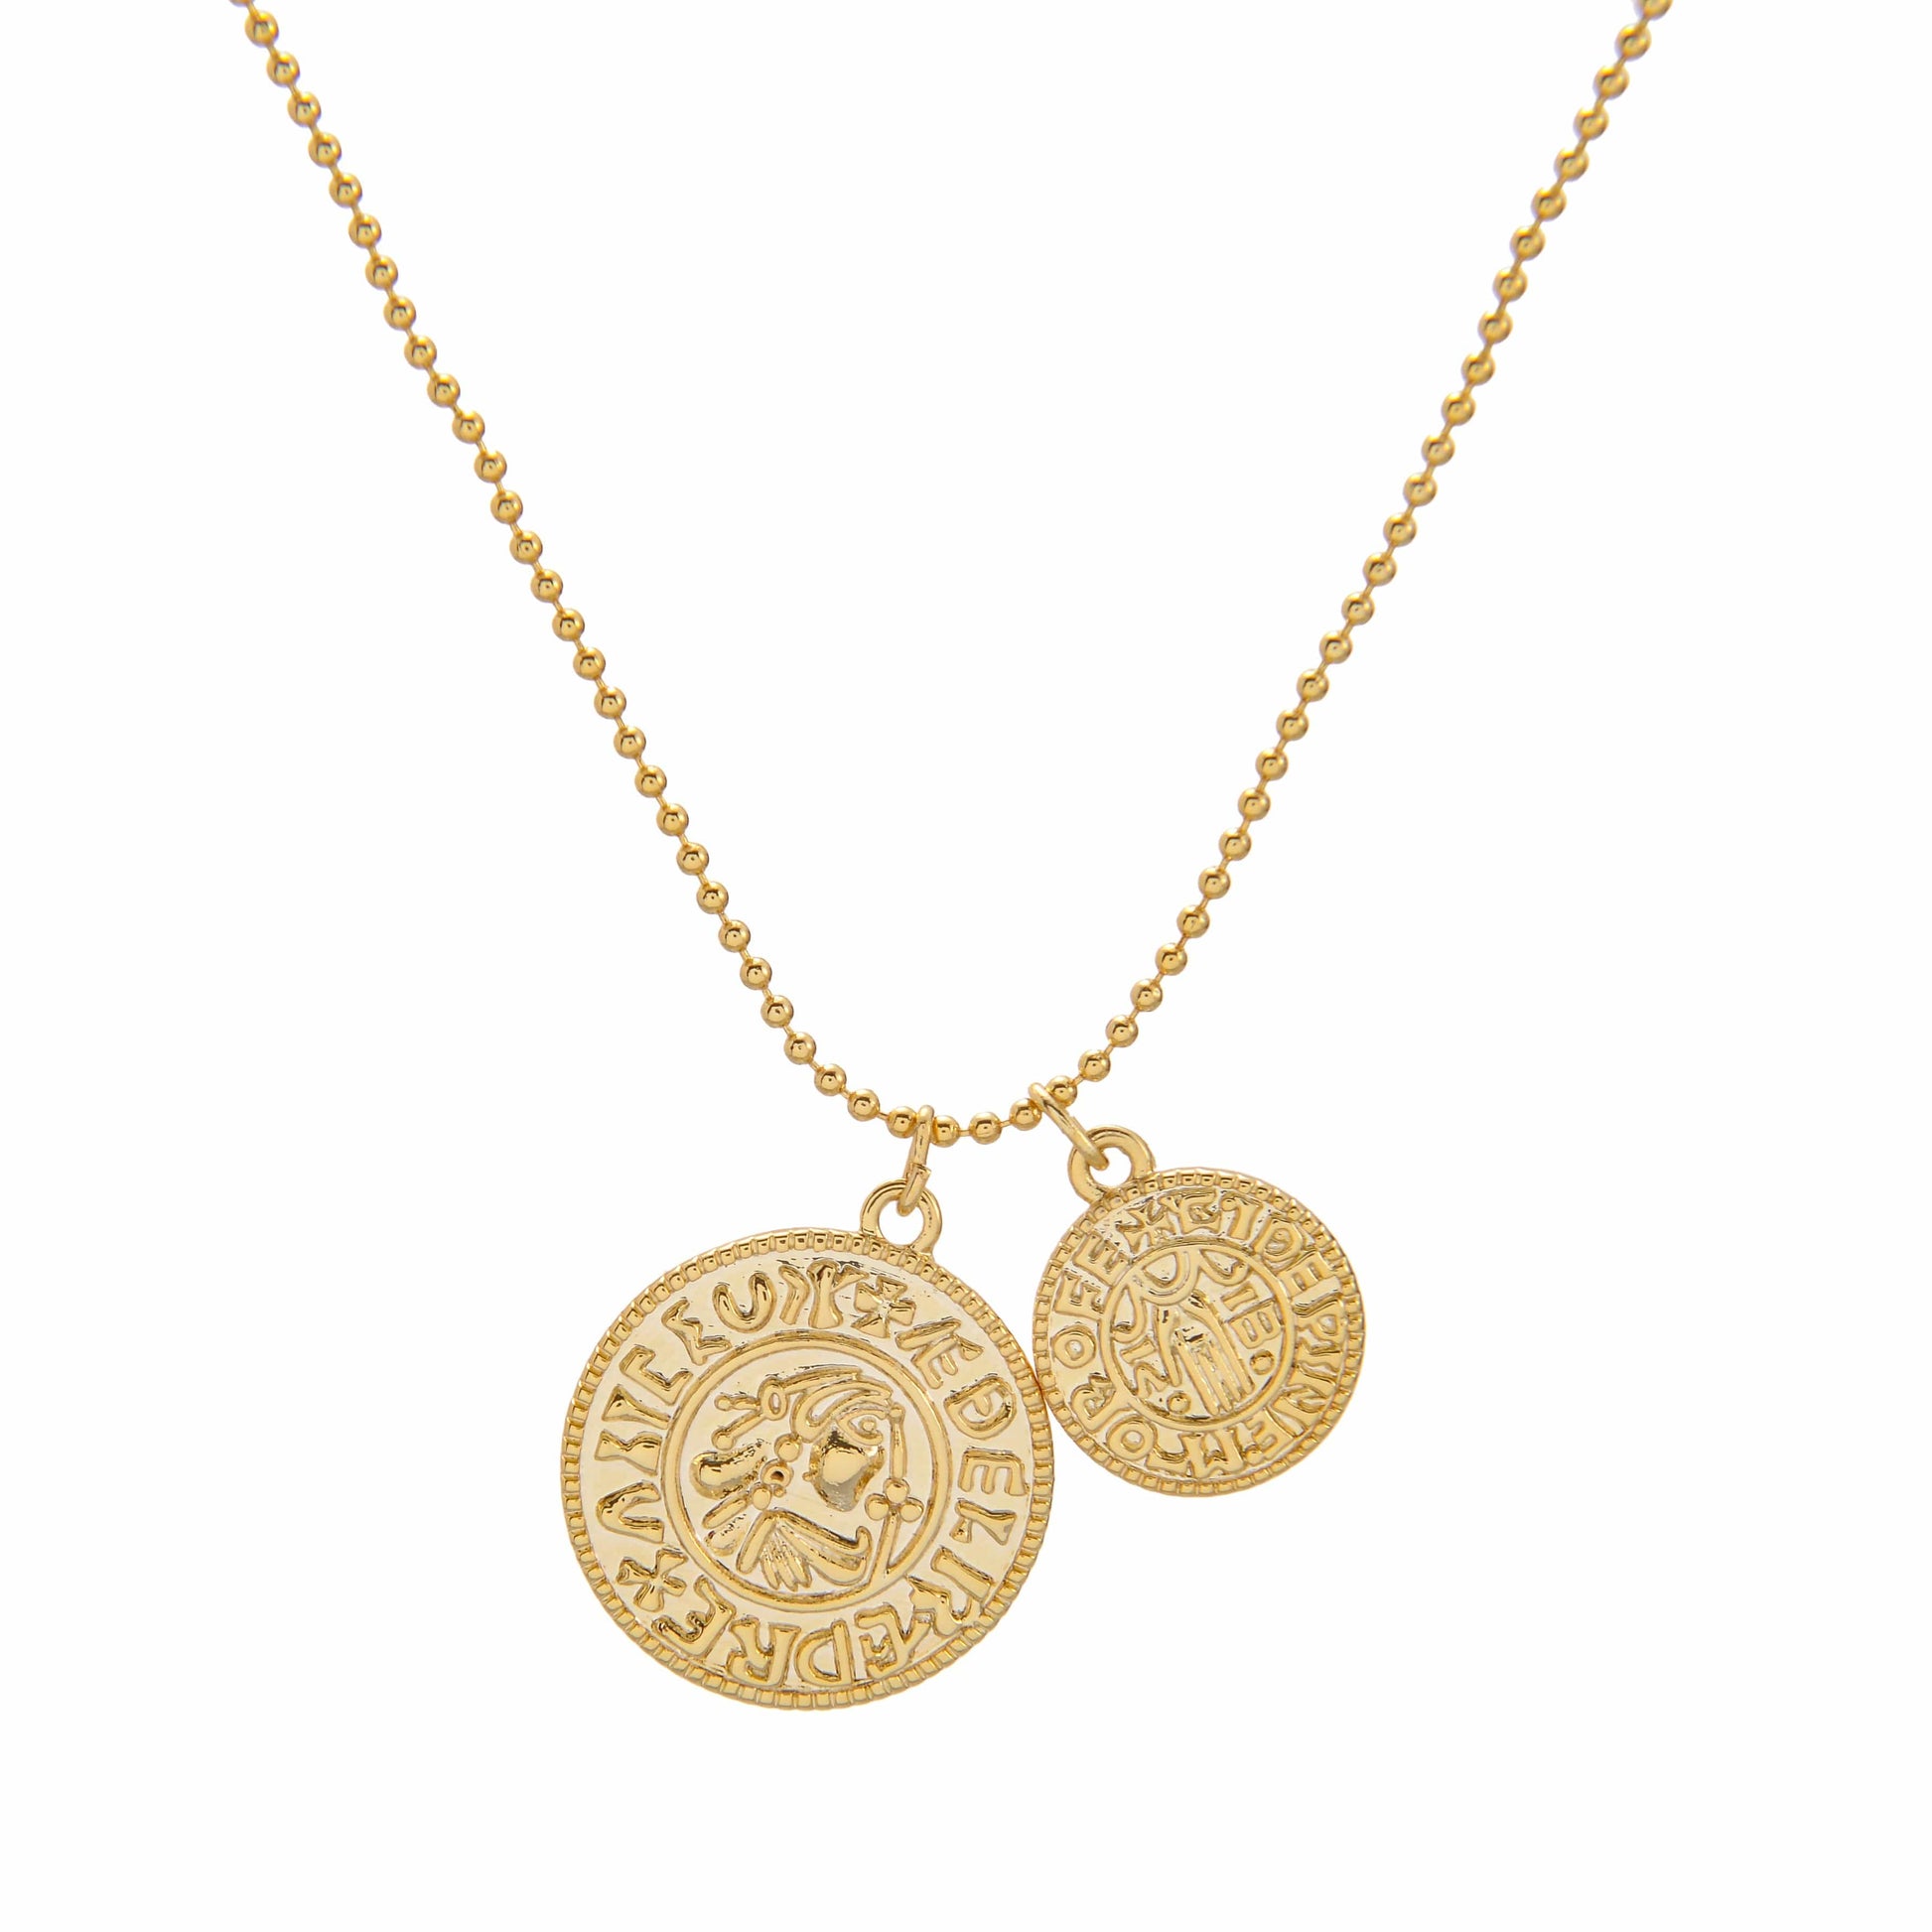 Double gold Irish disc with engraving on a beaded chain